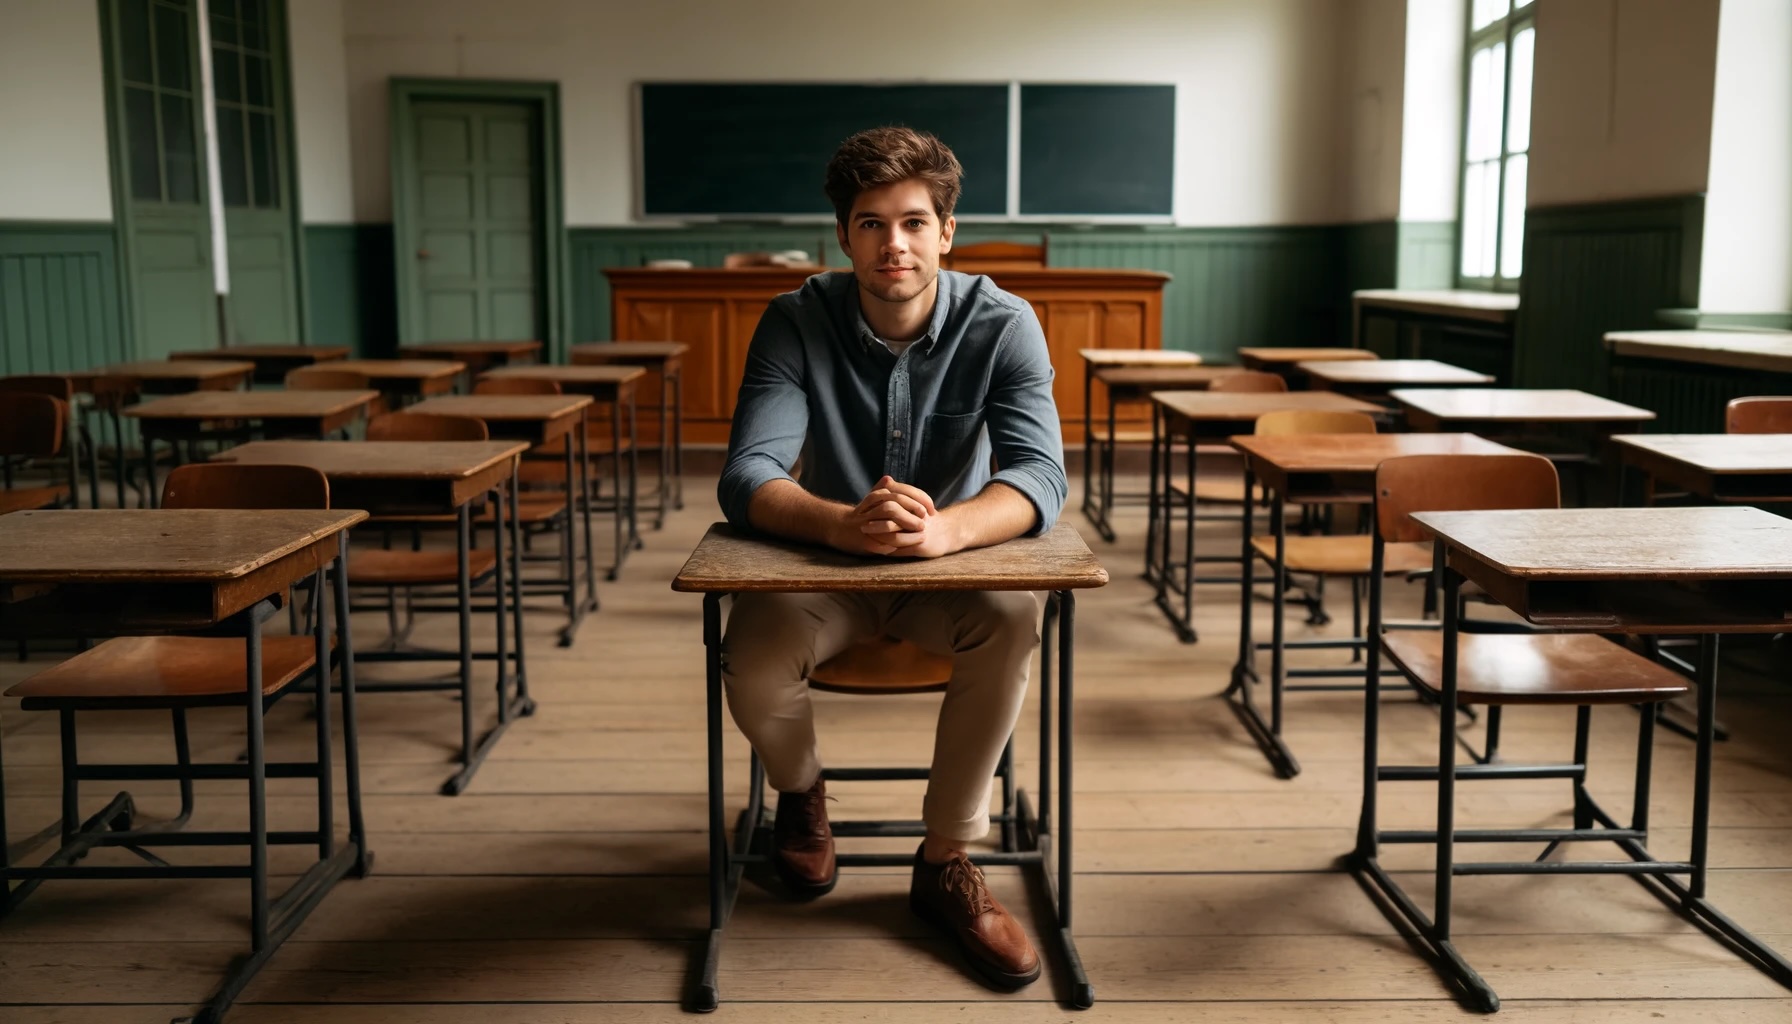 A young man sitting in an empty classroom at an old fashioned student's desk facing the viewer